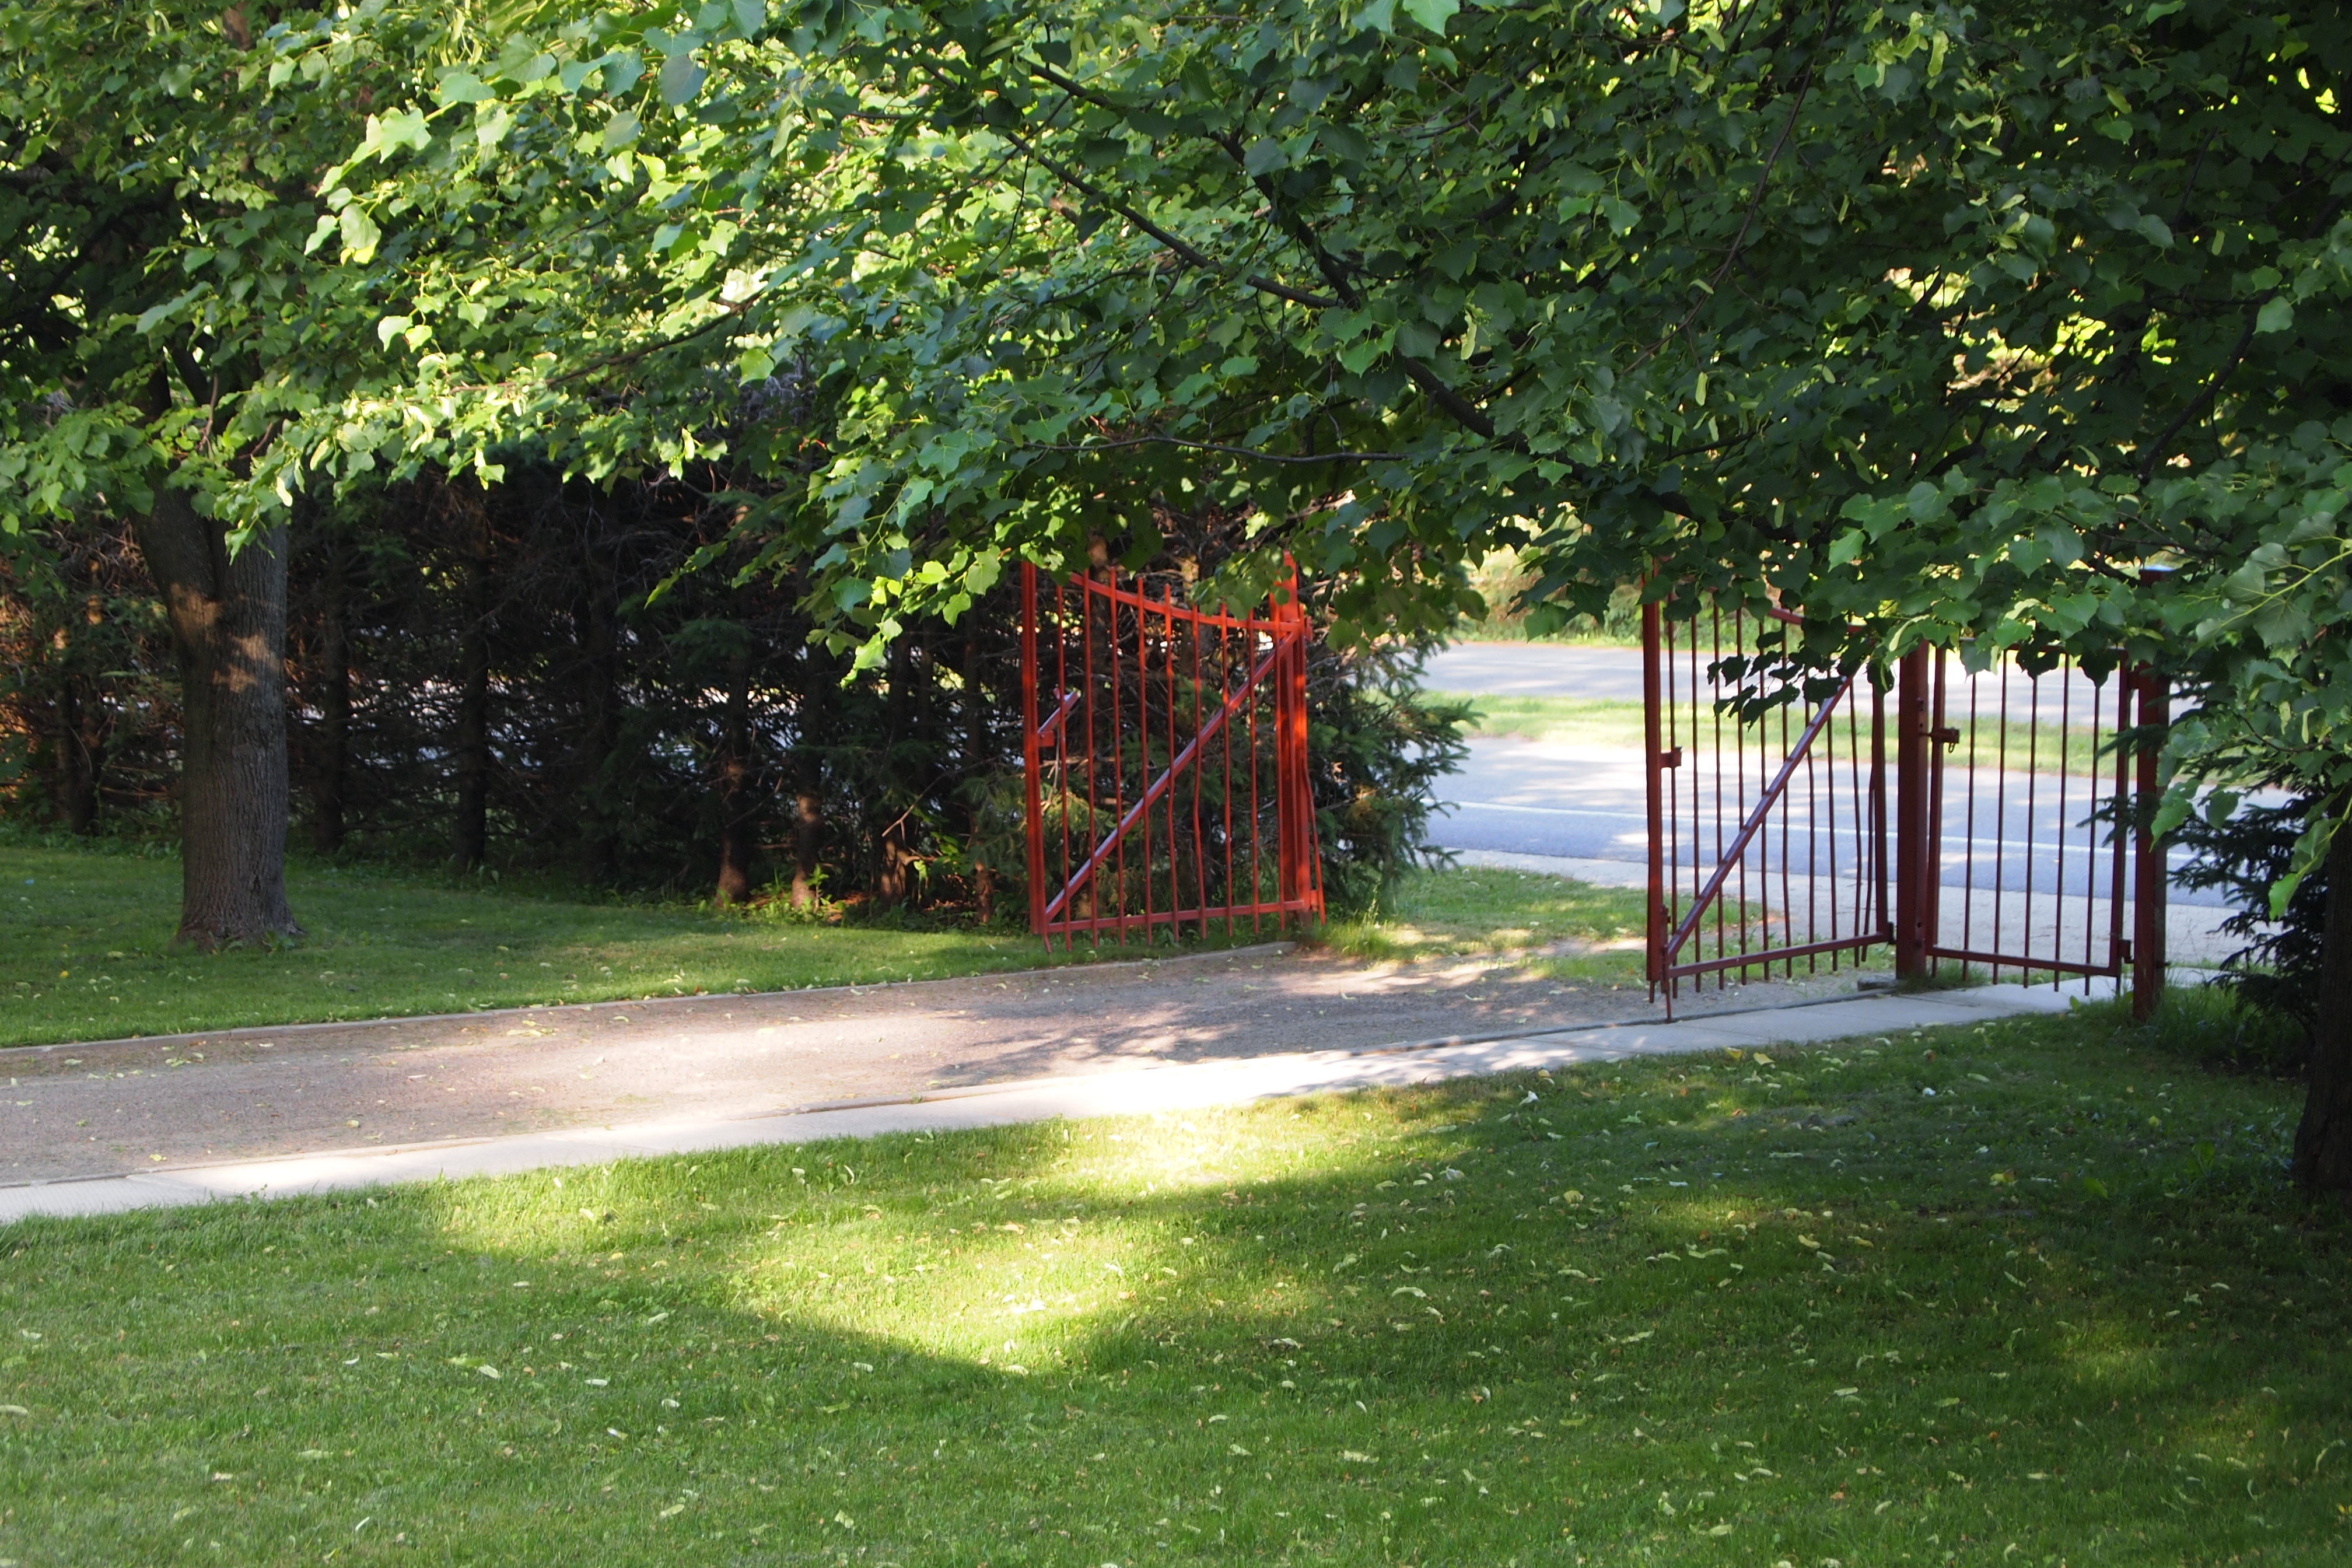 The great gates of 13ième Ave